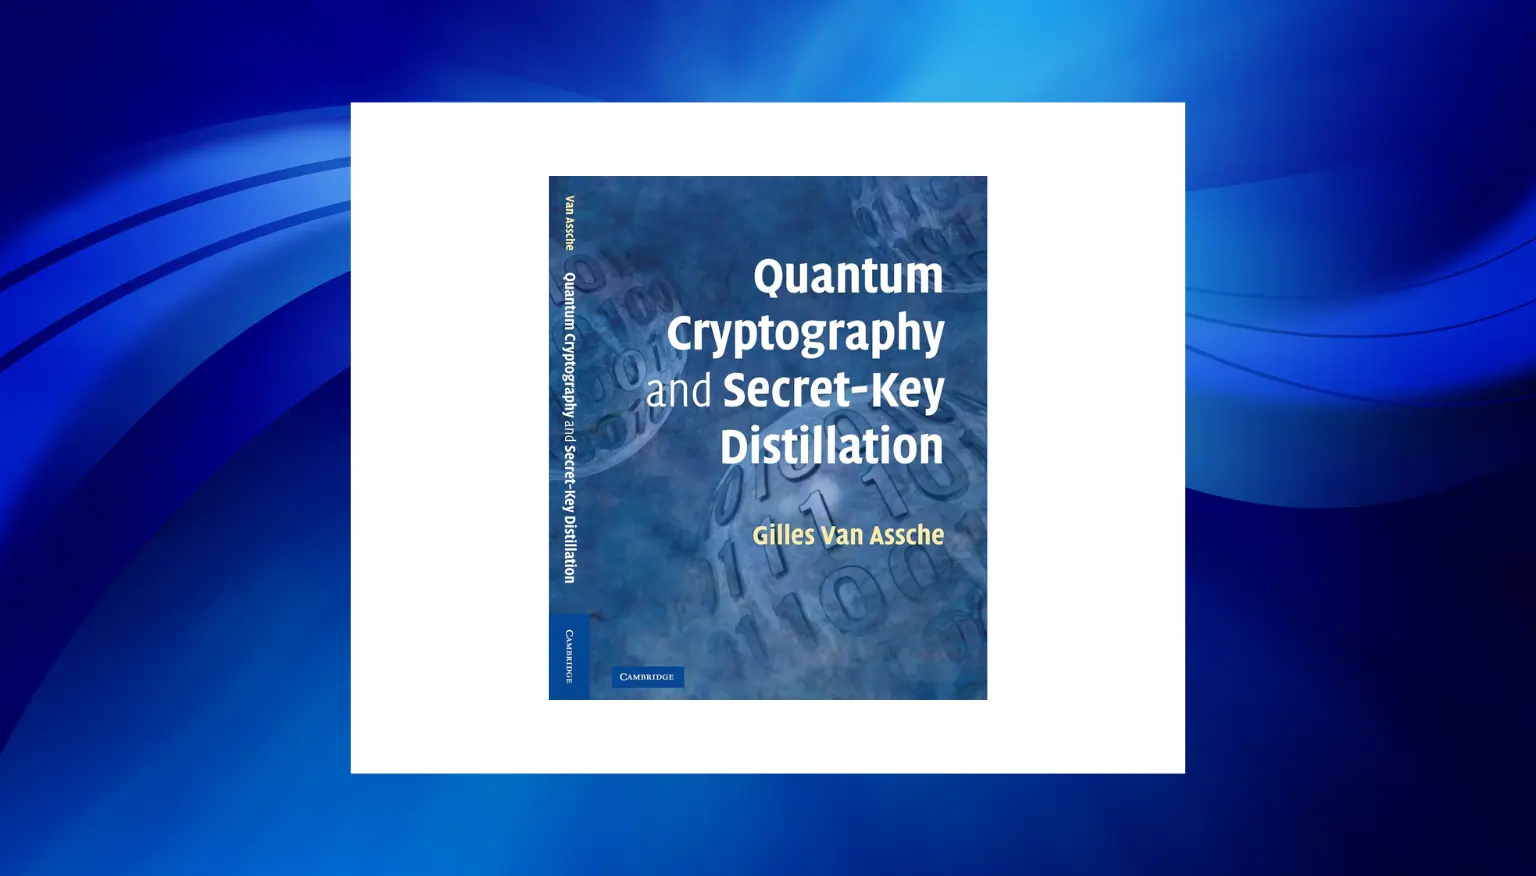 top cryptography books - Quantum Cryptography and Secret-Key Distillation by Gilles Van Assch